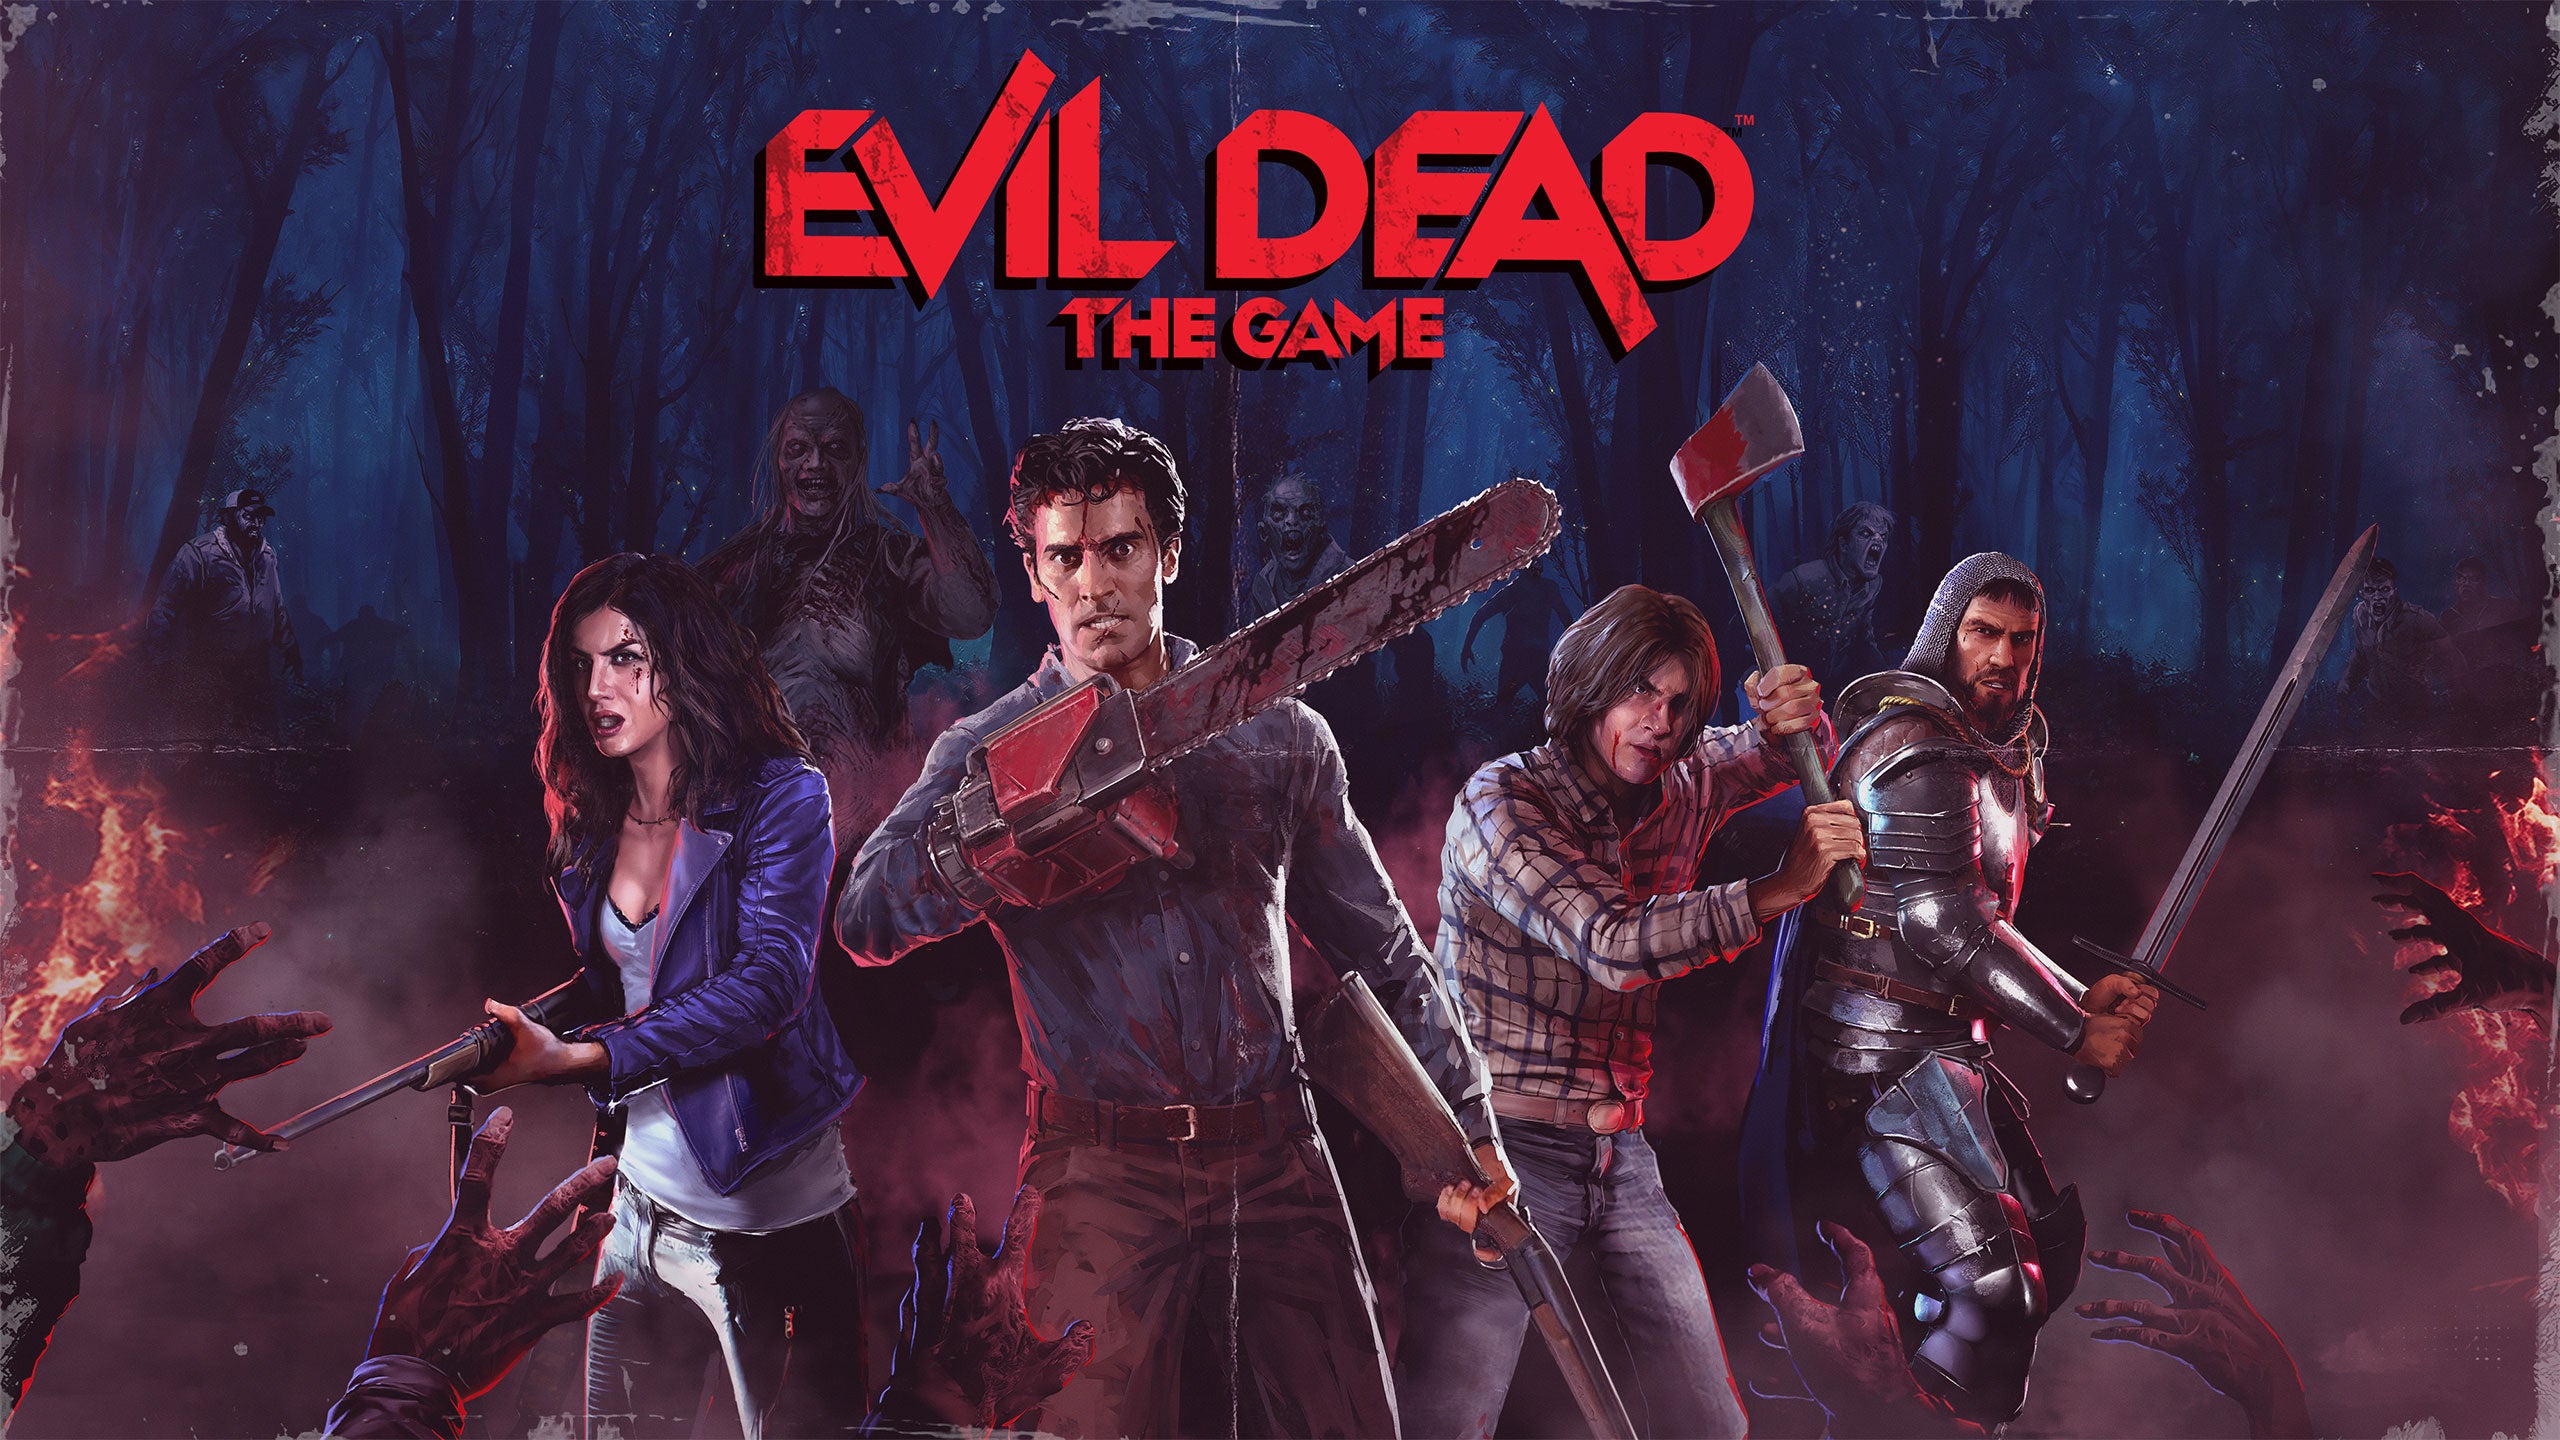 Image for Evil Dead: The Game understands Evil Dead: The Movies better than I expected